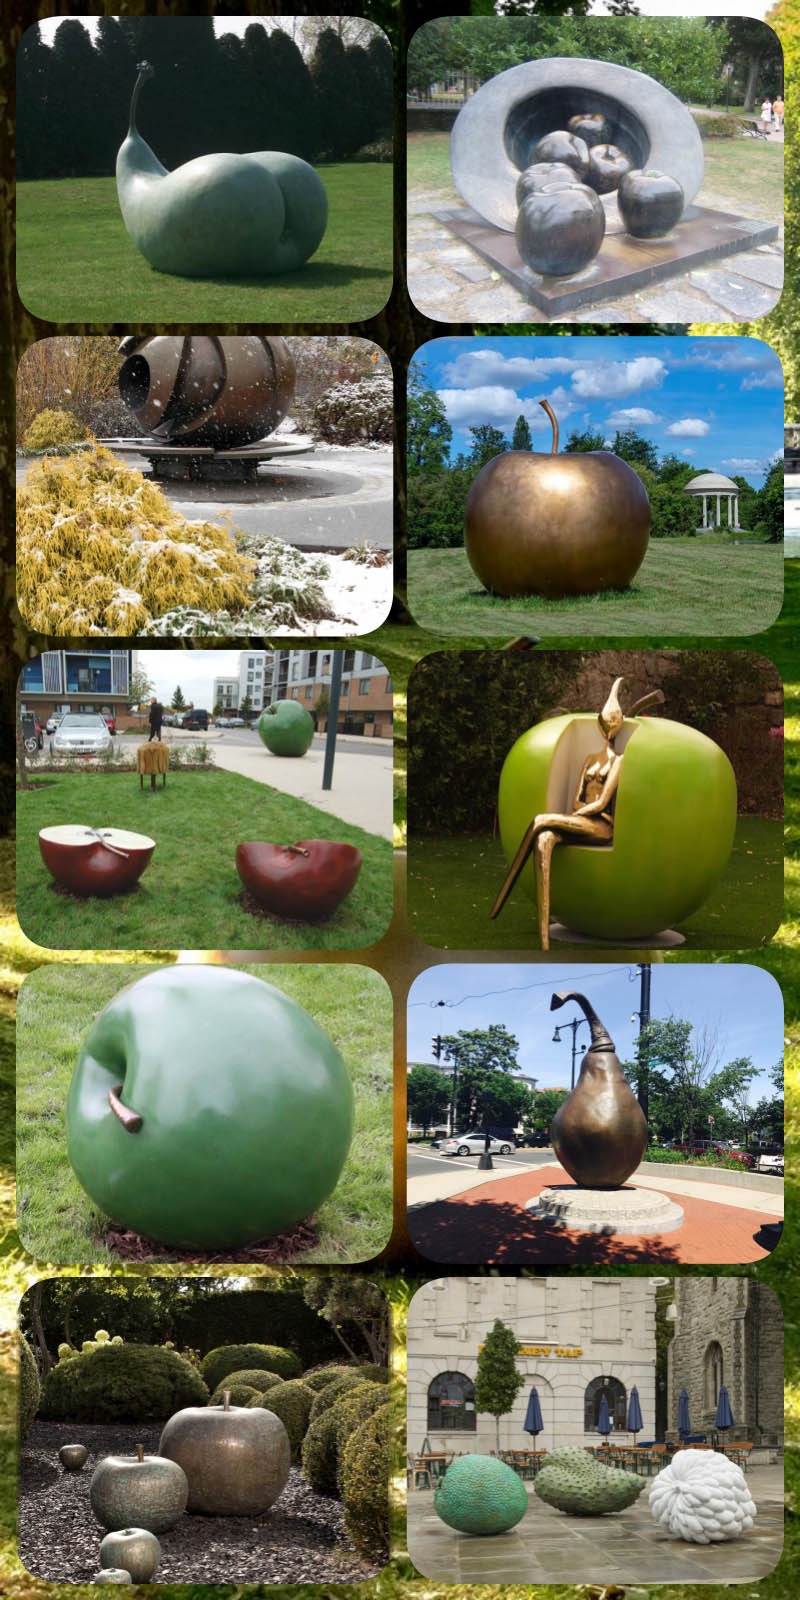 Introduction of Giant Apple Sculpture 1